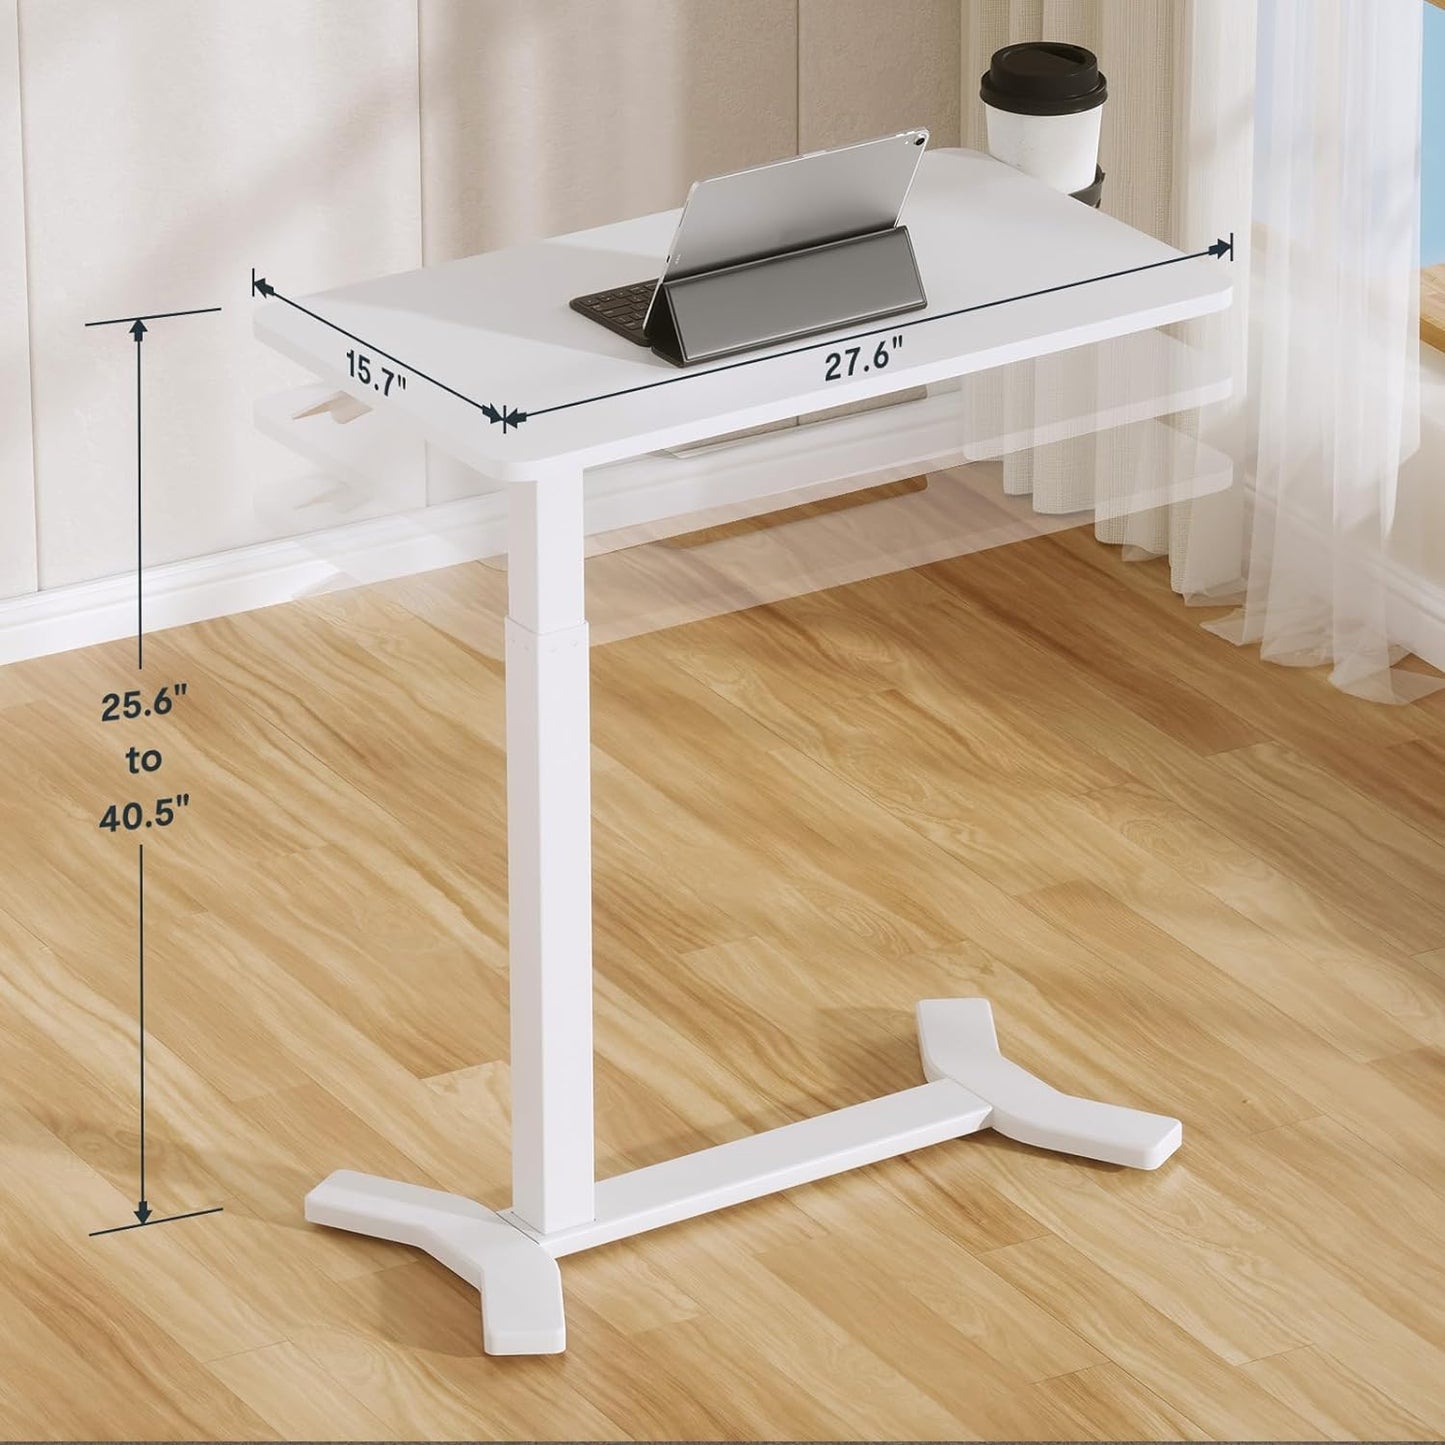 FLEXISPOT Medical Adjustable Overbed Bedside Table with Wheels Pneumatic Mobile Standing Desk Laptop Desk Rolling Computer Cart Movable Overbed Table Hospital Home Use(27.6" W x 15.7" D, White) - Selzalot